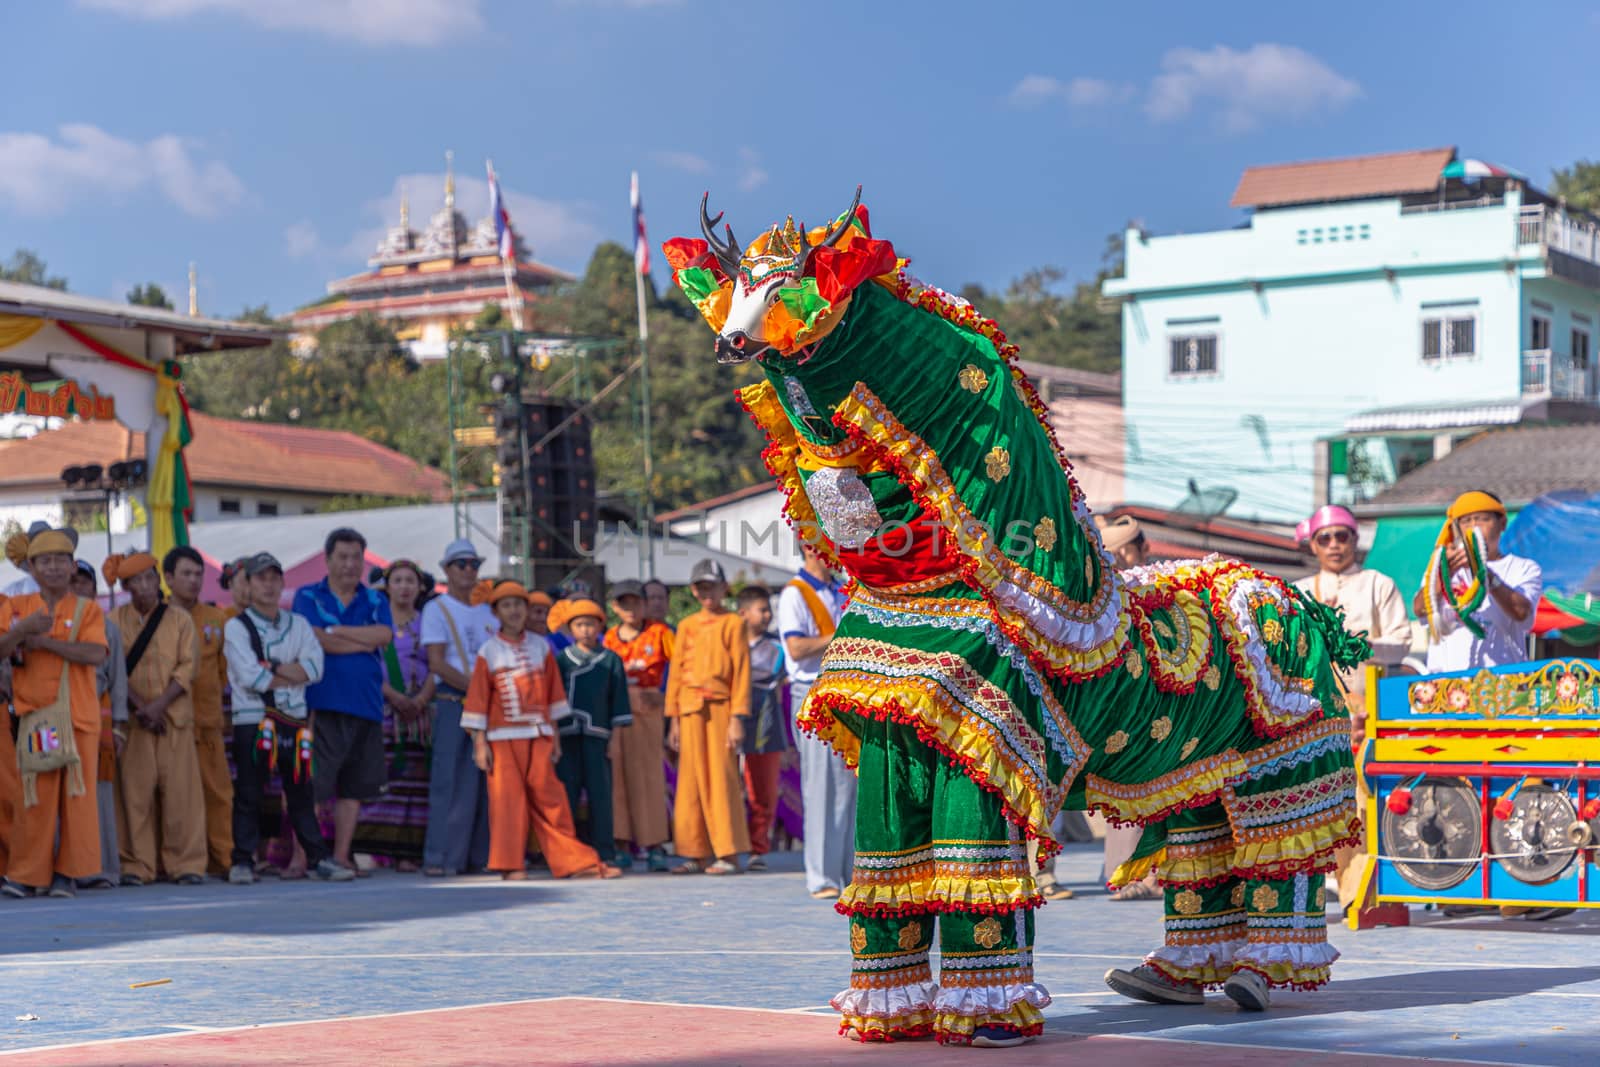 Thoet Thai, Chiang Rai - THAILAND, November 27, 2019 : Group of Shan or Tai Yai (ethnic group living in parts of Myanmar and Thailand) in tribal dress do native dancing in Shan New Year celebrations.